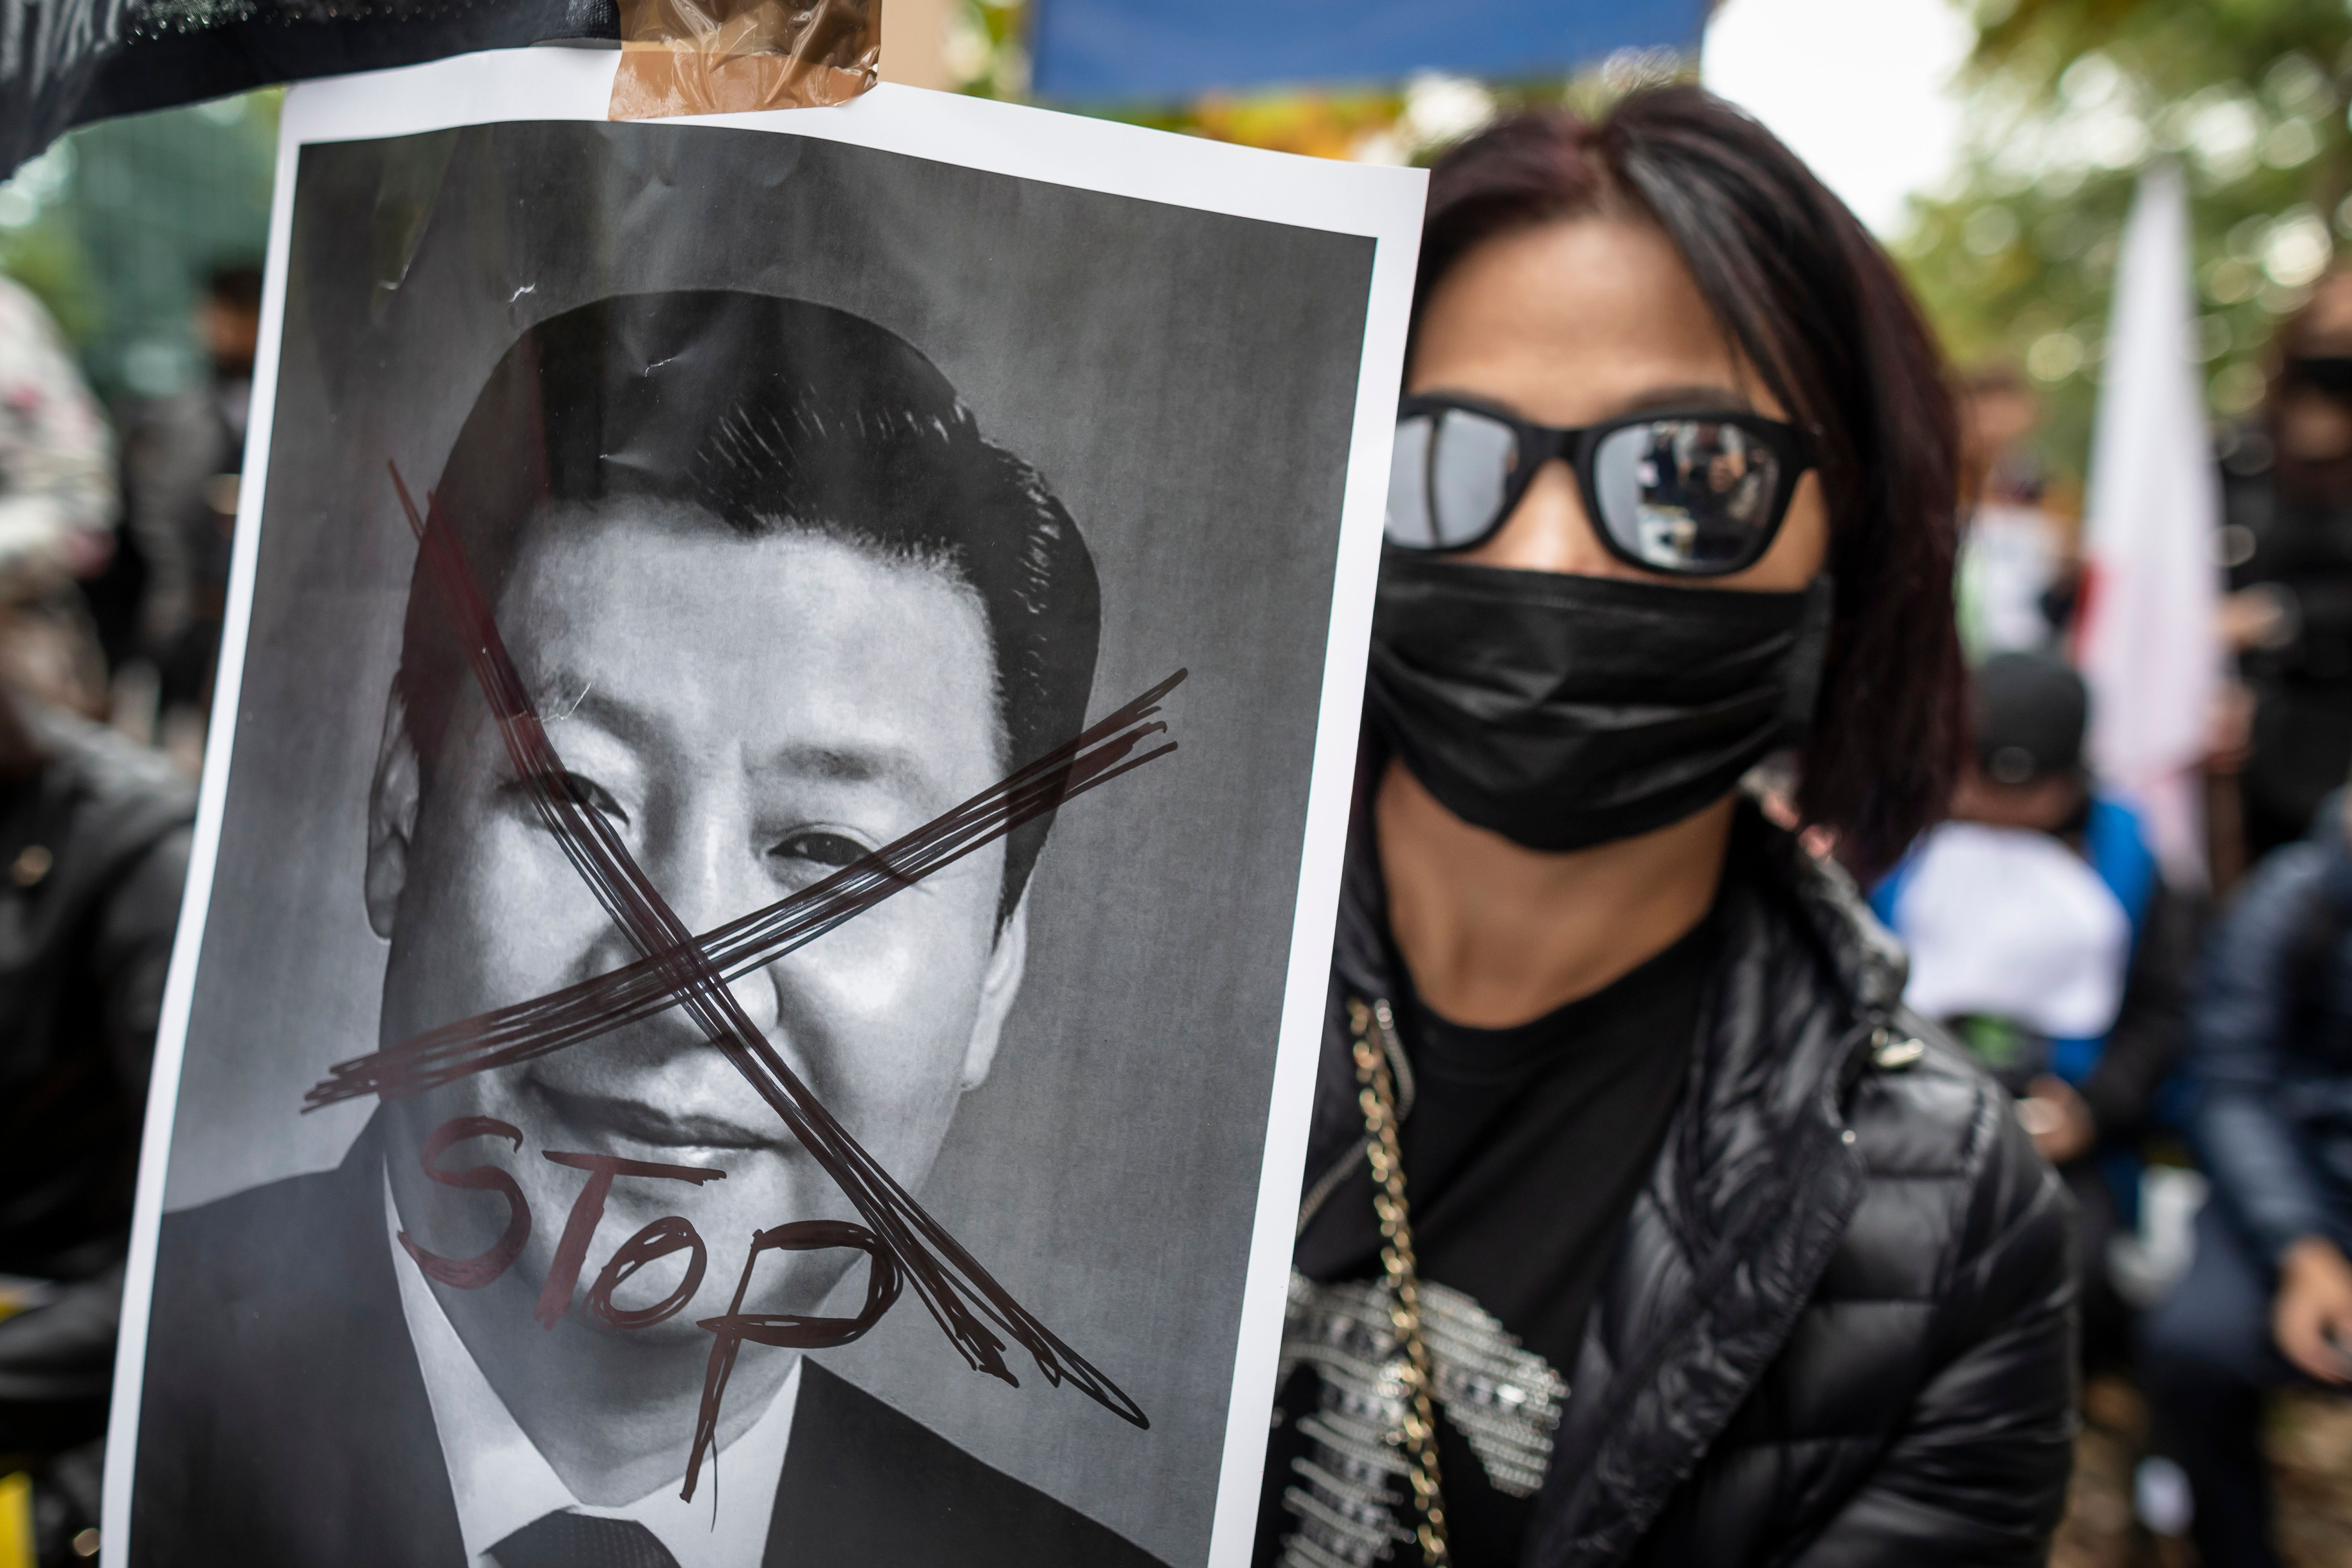 A protestor holds a portrait of Xi Jinping - General Secretary of the Communist Party of China as they demonstrate in front of China embassy in Warsaw in support of pro democracy protests in Hong Kong, September 29, 2019. (Photo by Wojtek RADWANSKI / AFP) (Photo credit should read WOJTEK RADWANSKI/AFP/Getty Images)